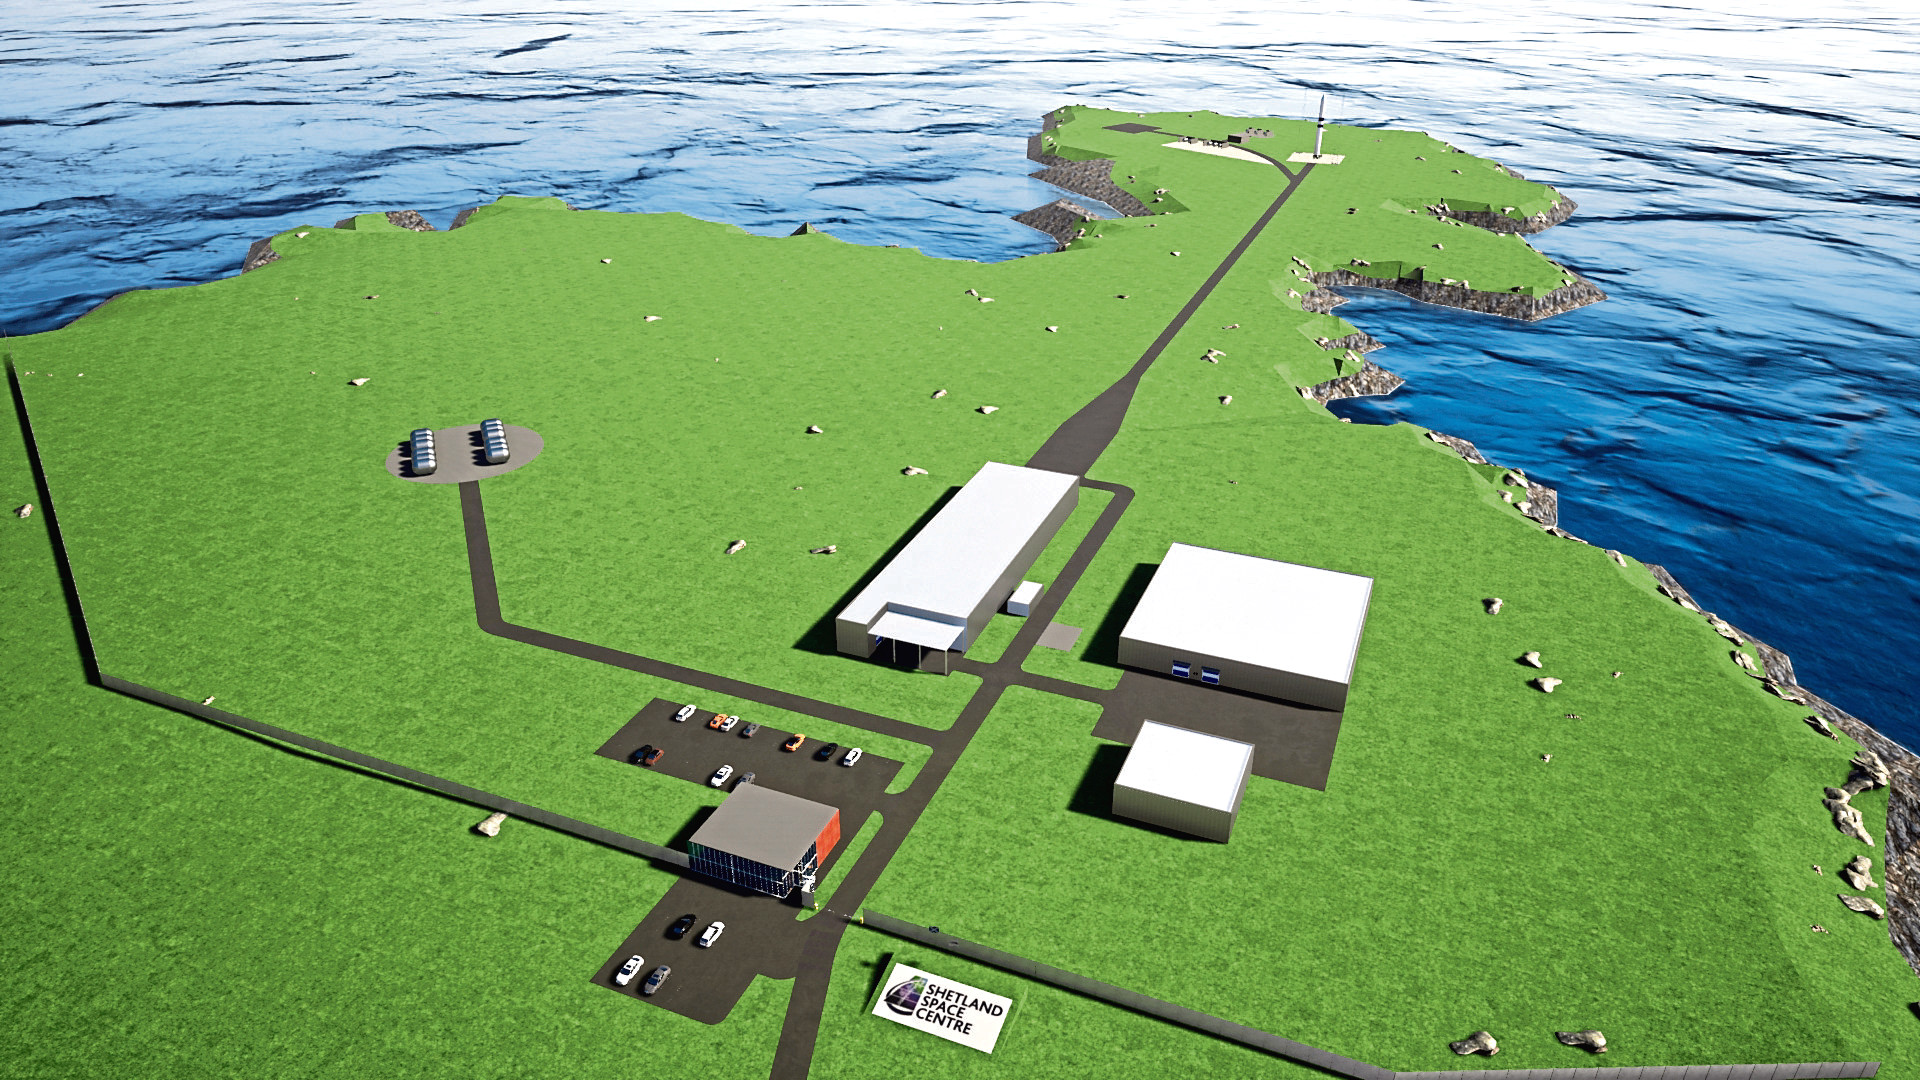 An artist impression of what the Shetland Space Centre site will look like